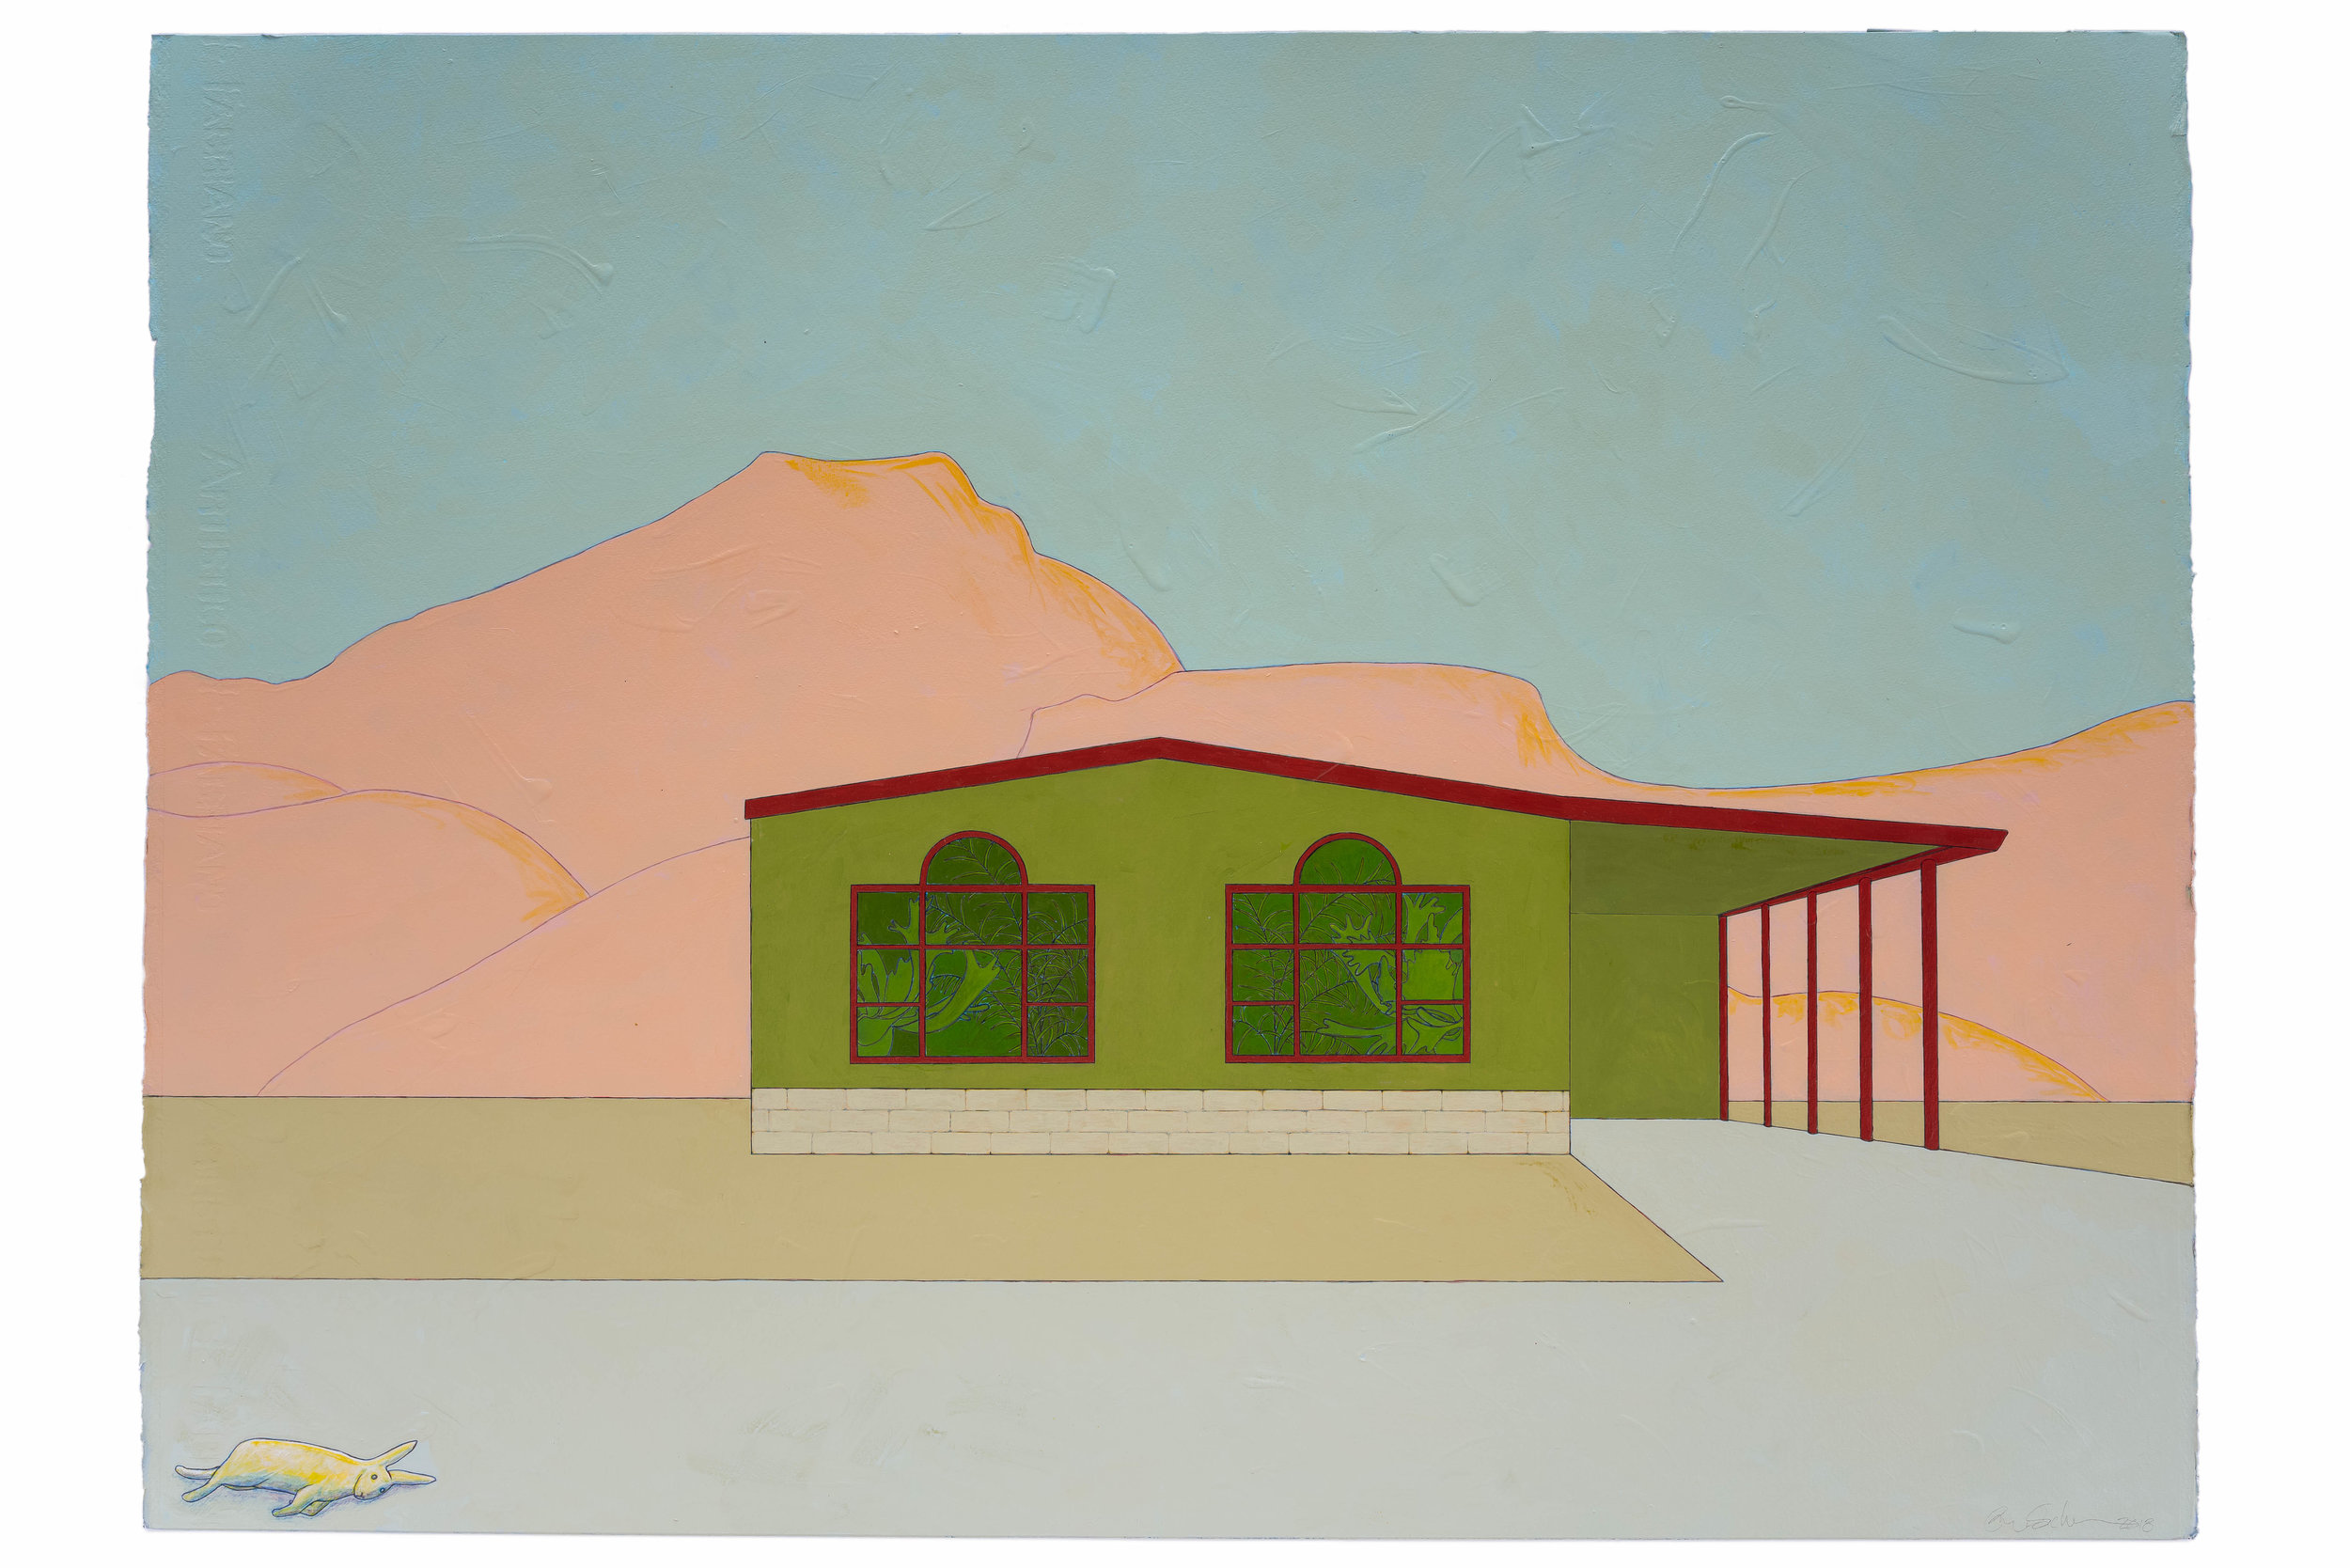   Green House,  2018 Acrylic on paper, 22” x 30”  {Sold} 